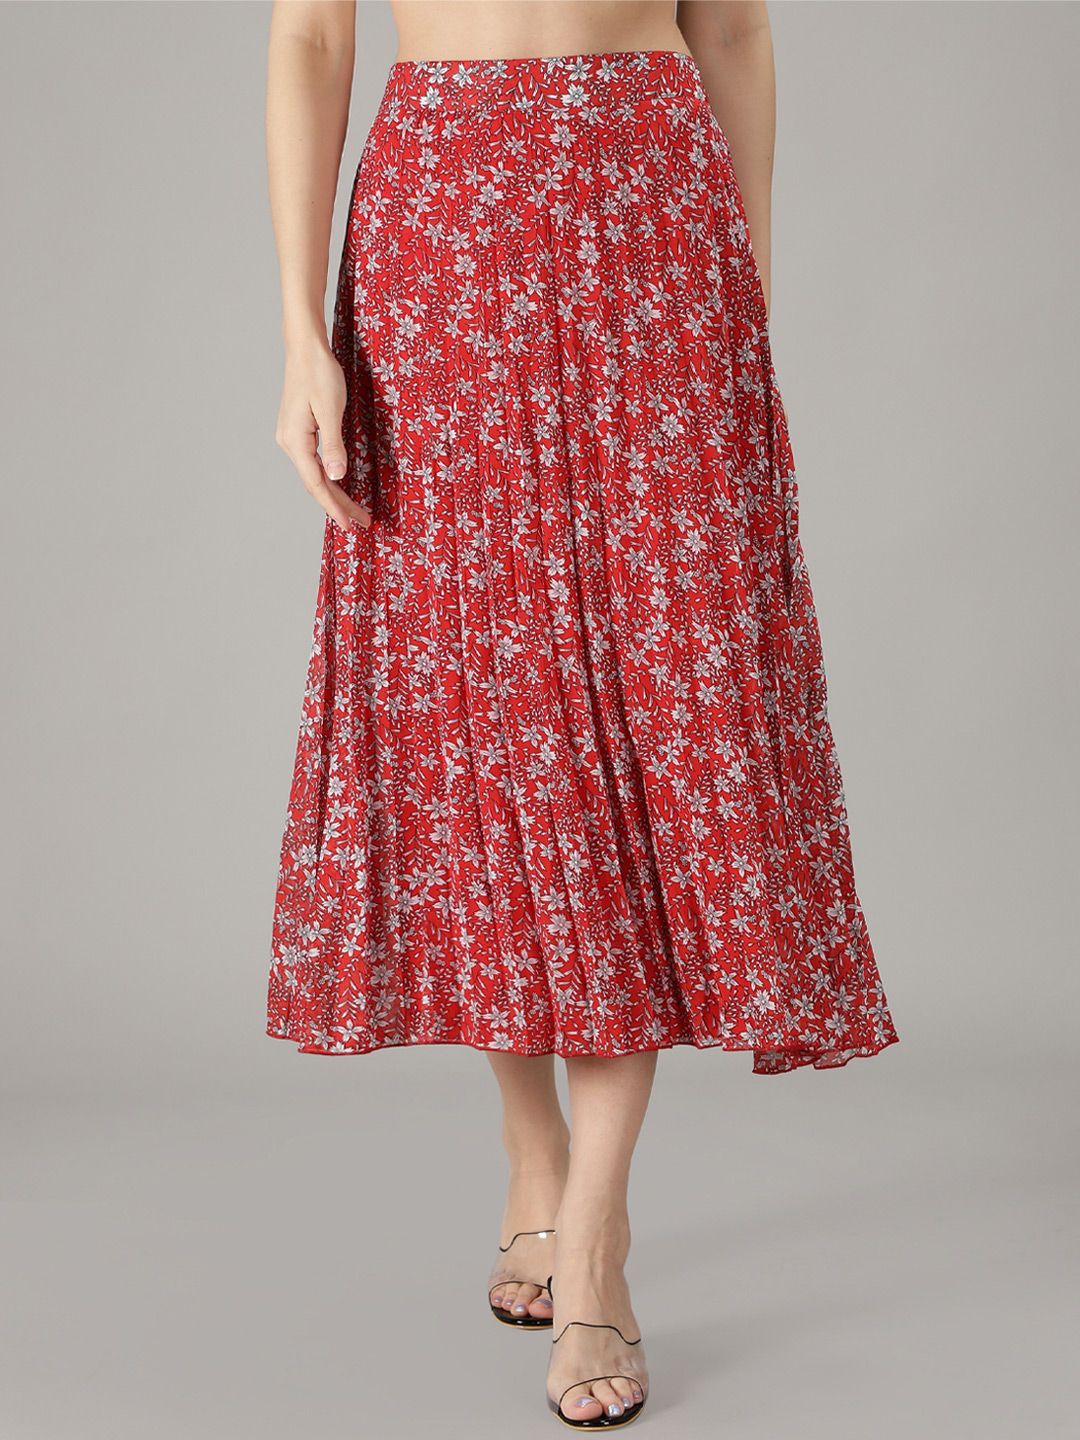 NUEVOSDAMAS Women Red & White Floral Printed A-Line Knee-Length Skirts Price in India